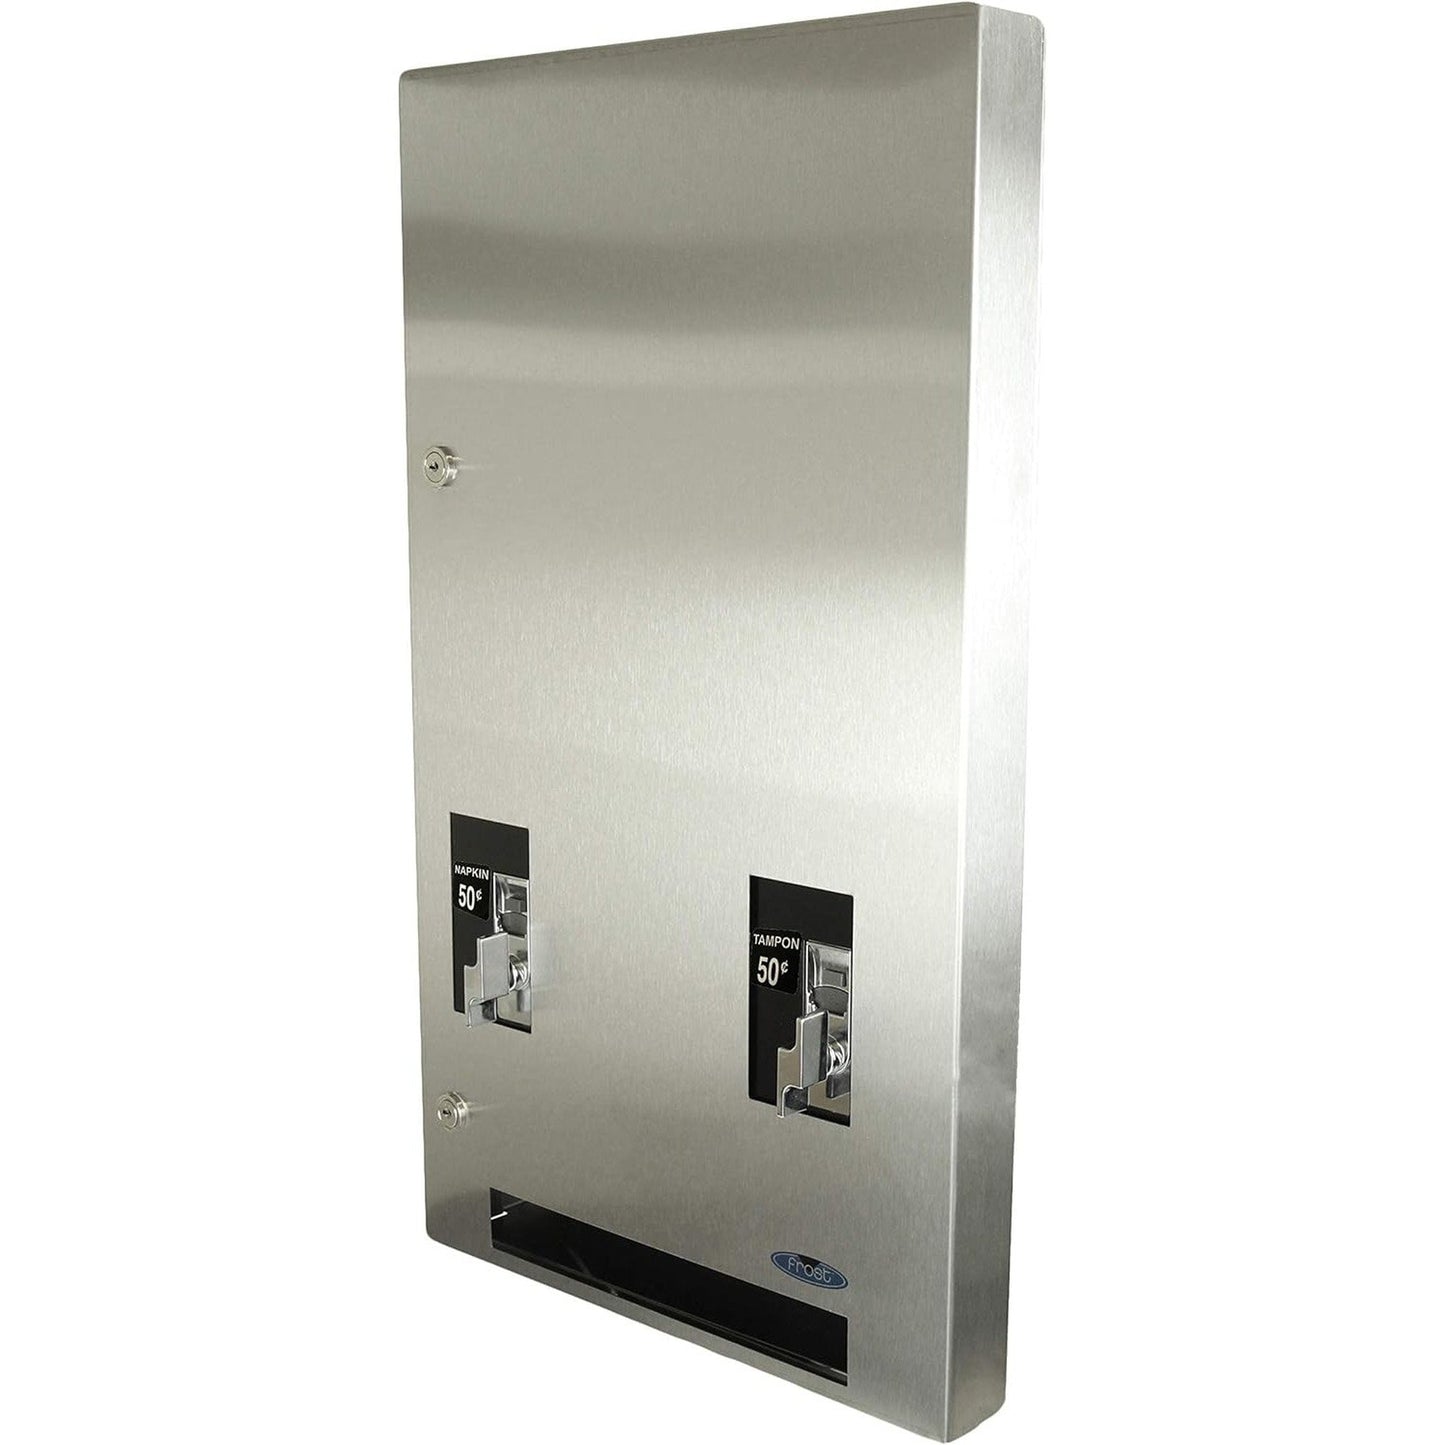 Frost 615-5-0.50 Recessed Stainless Steel Napkin and Tampon Dispenser